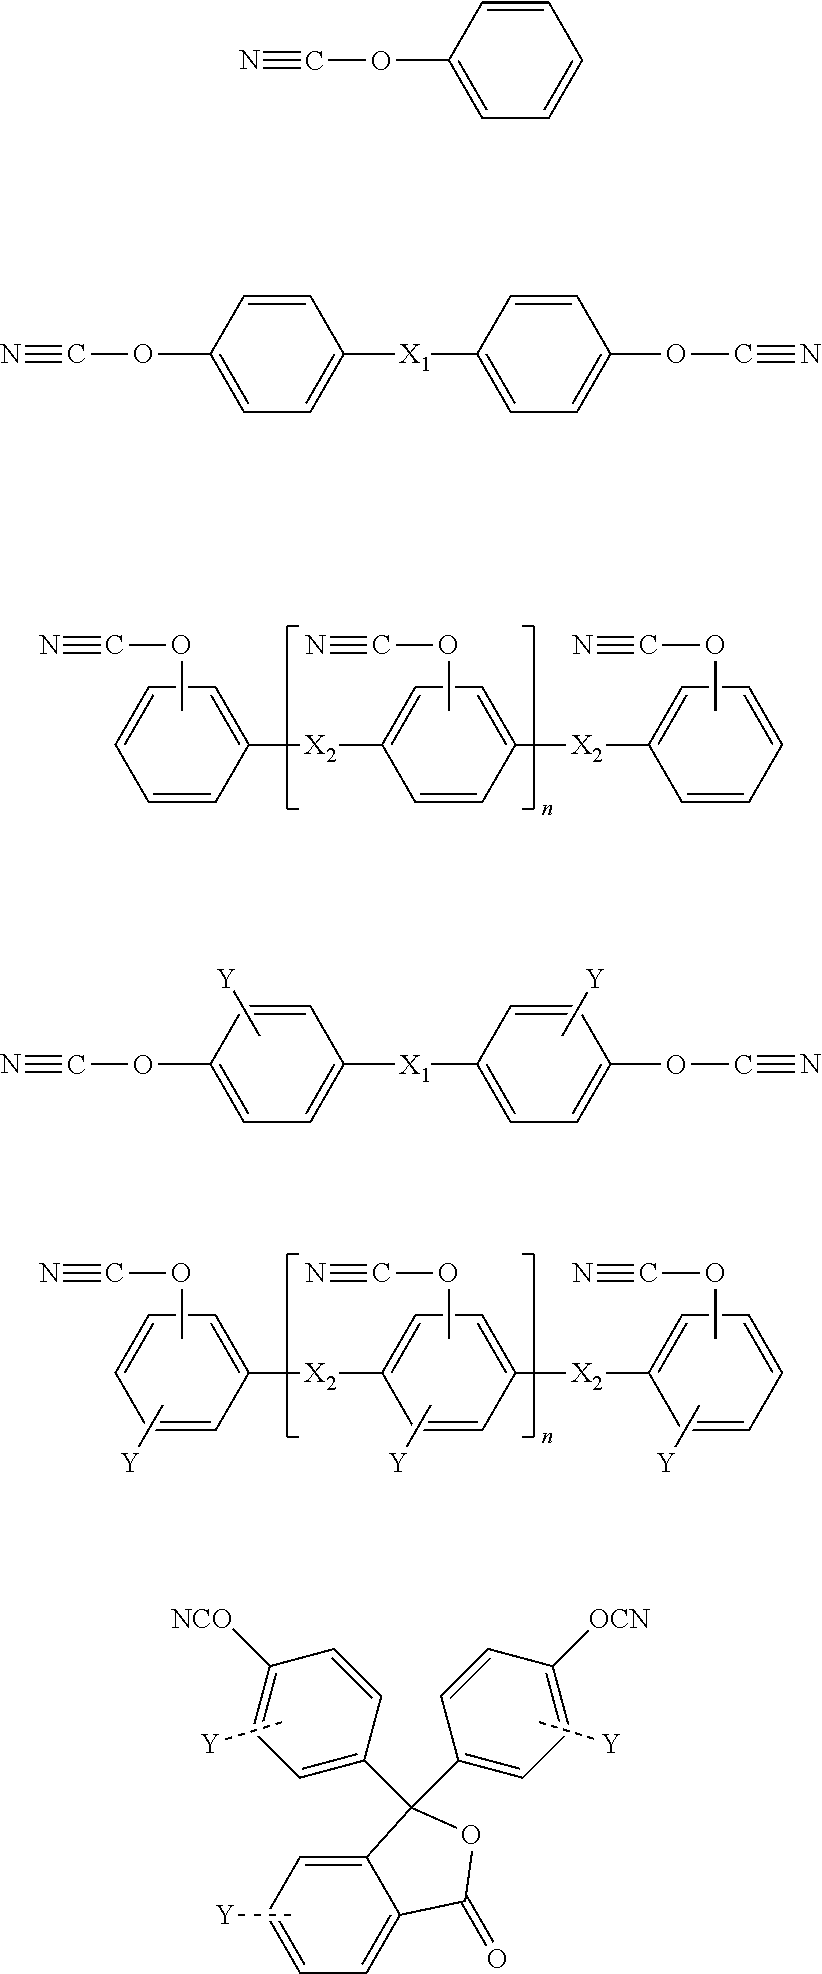 Low dielectric halogen-free resin composition and circuit board using the same